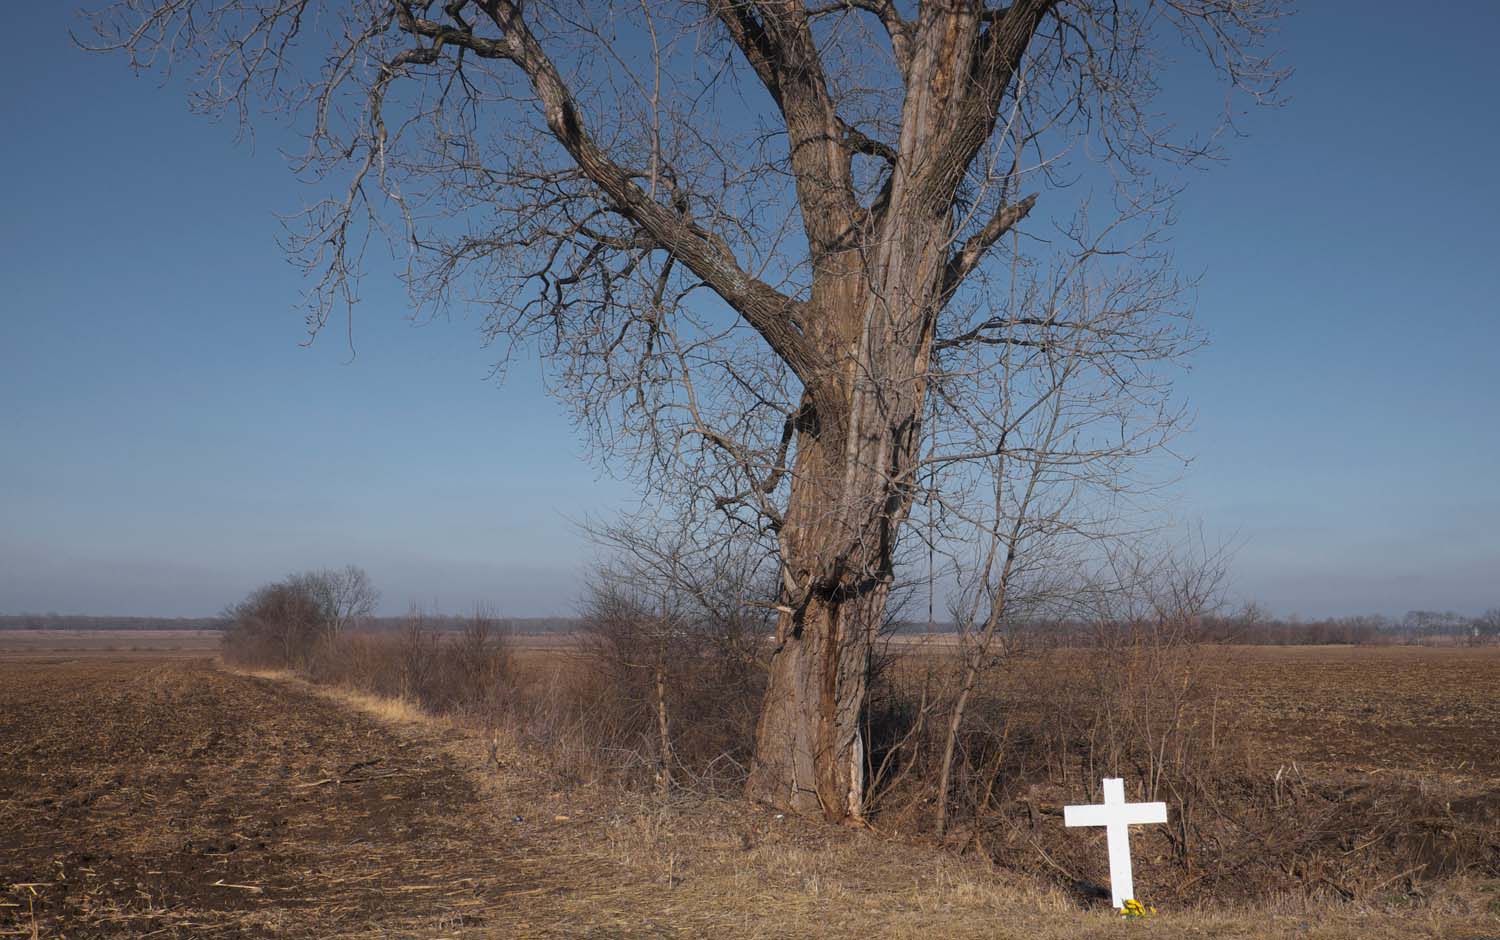  White cross by the side of the road marking a fatal accident. Schuylar County, IL January, 2017 